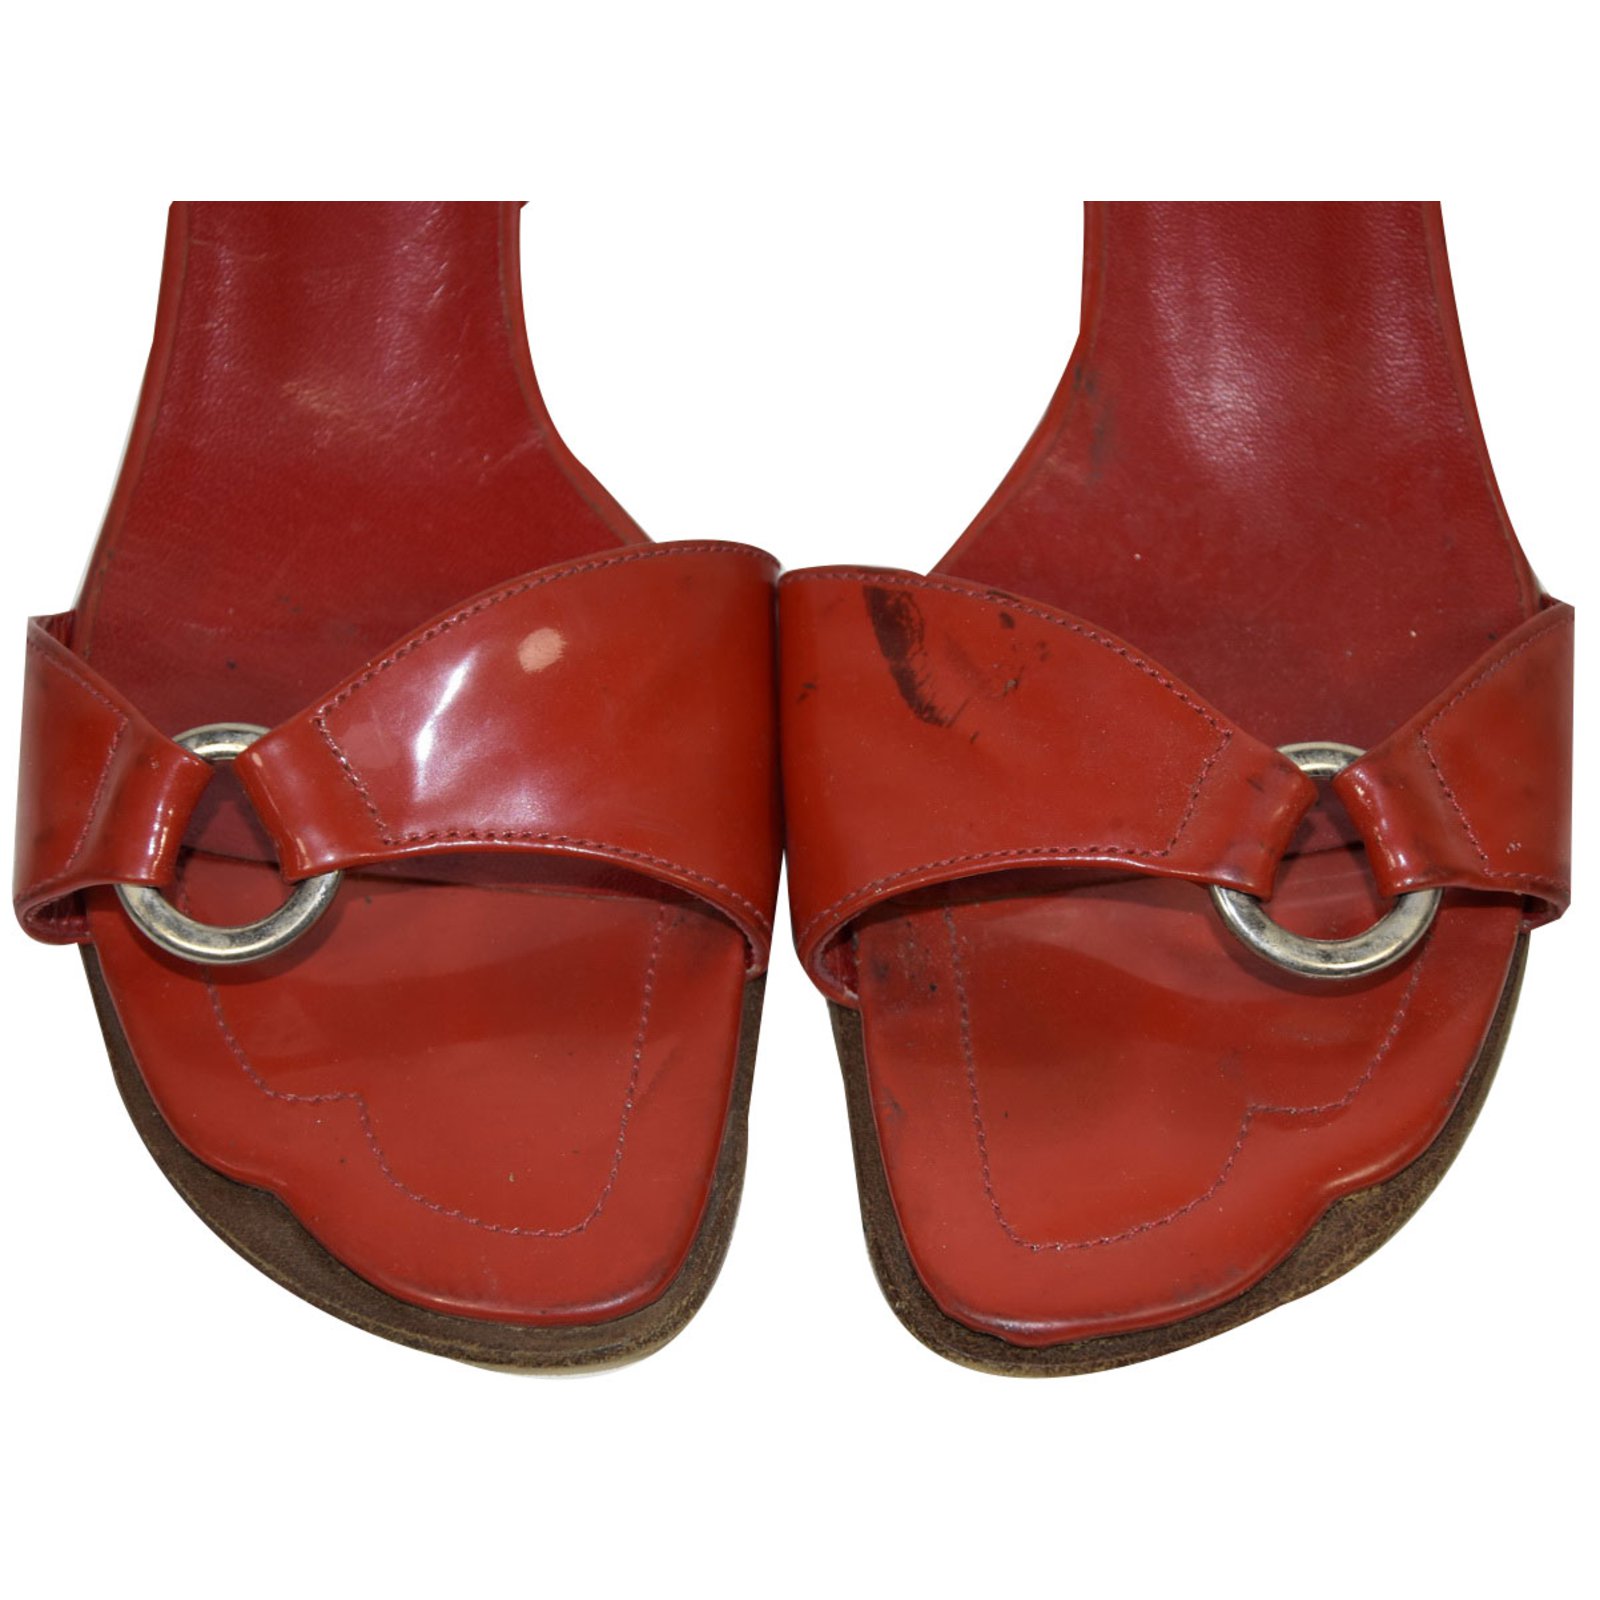 red patent mules